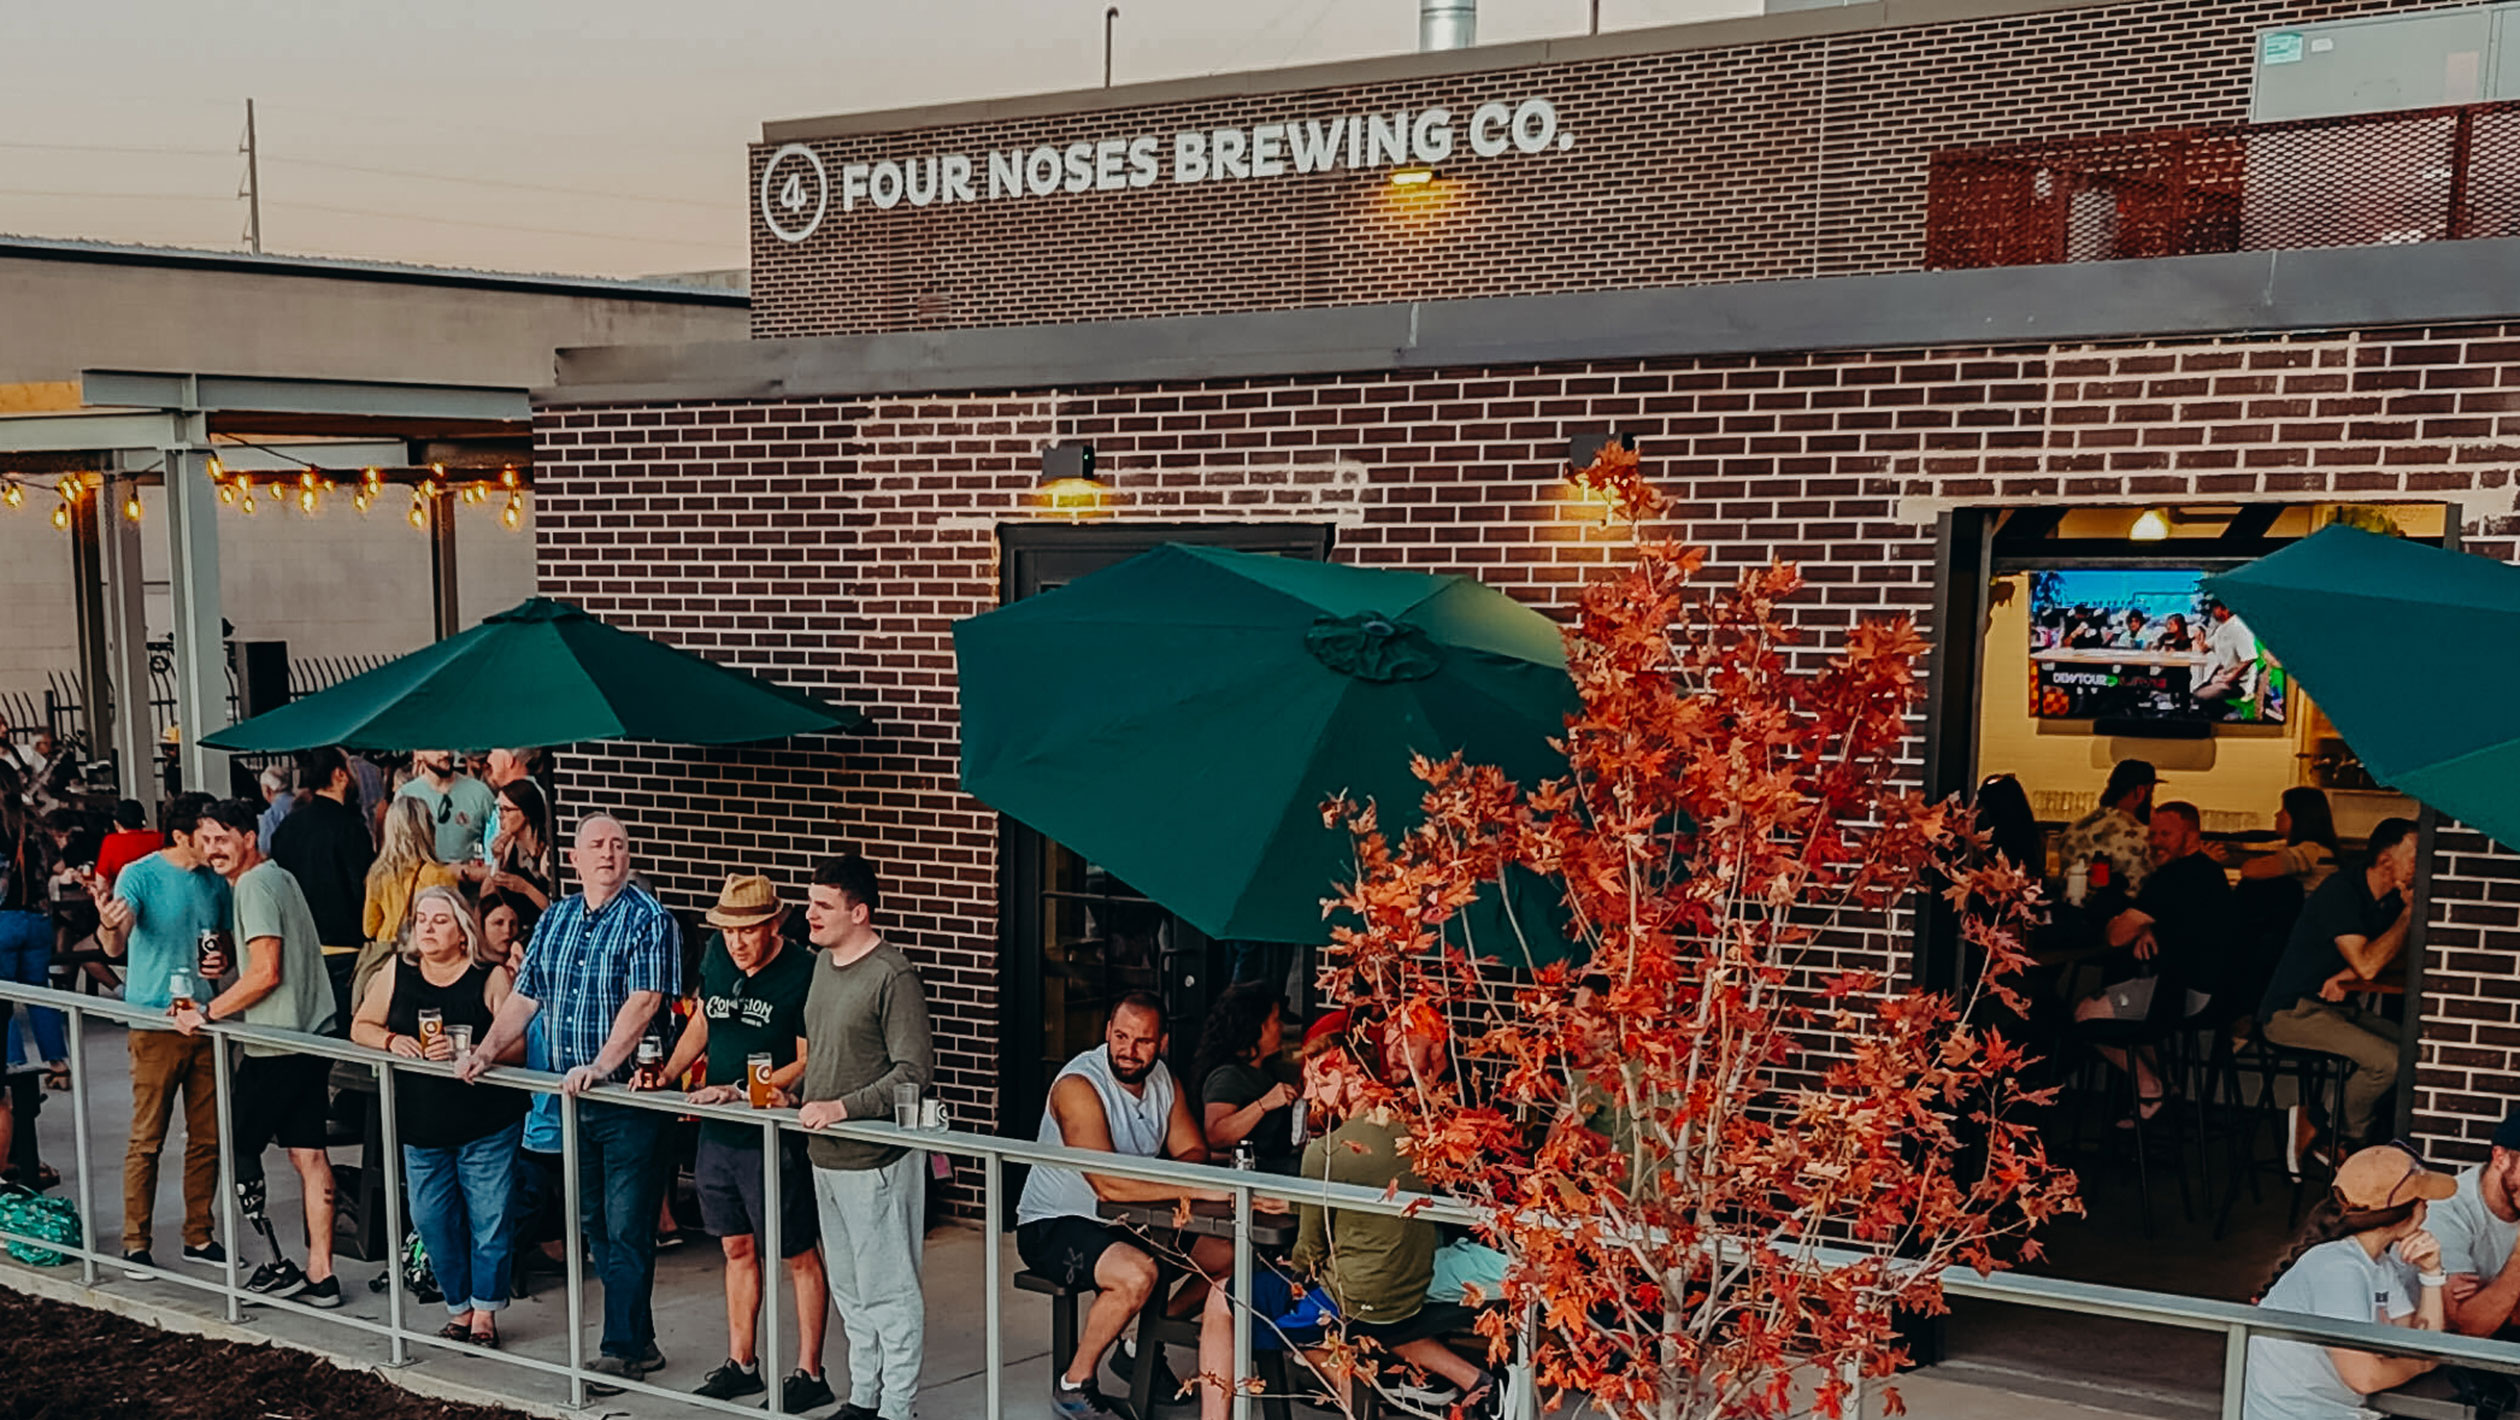 Consumers gather in an outdoor seating area at 4 Noses Brewing.